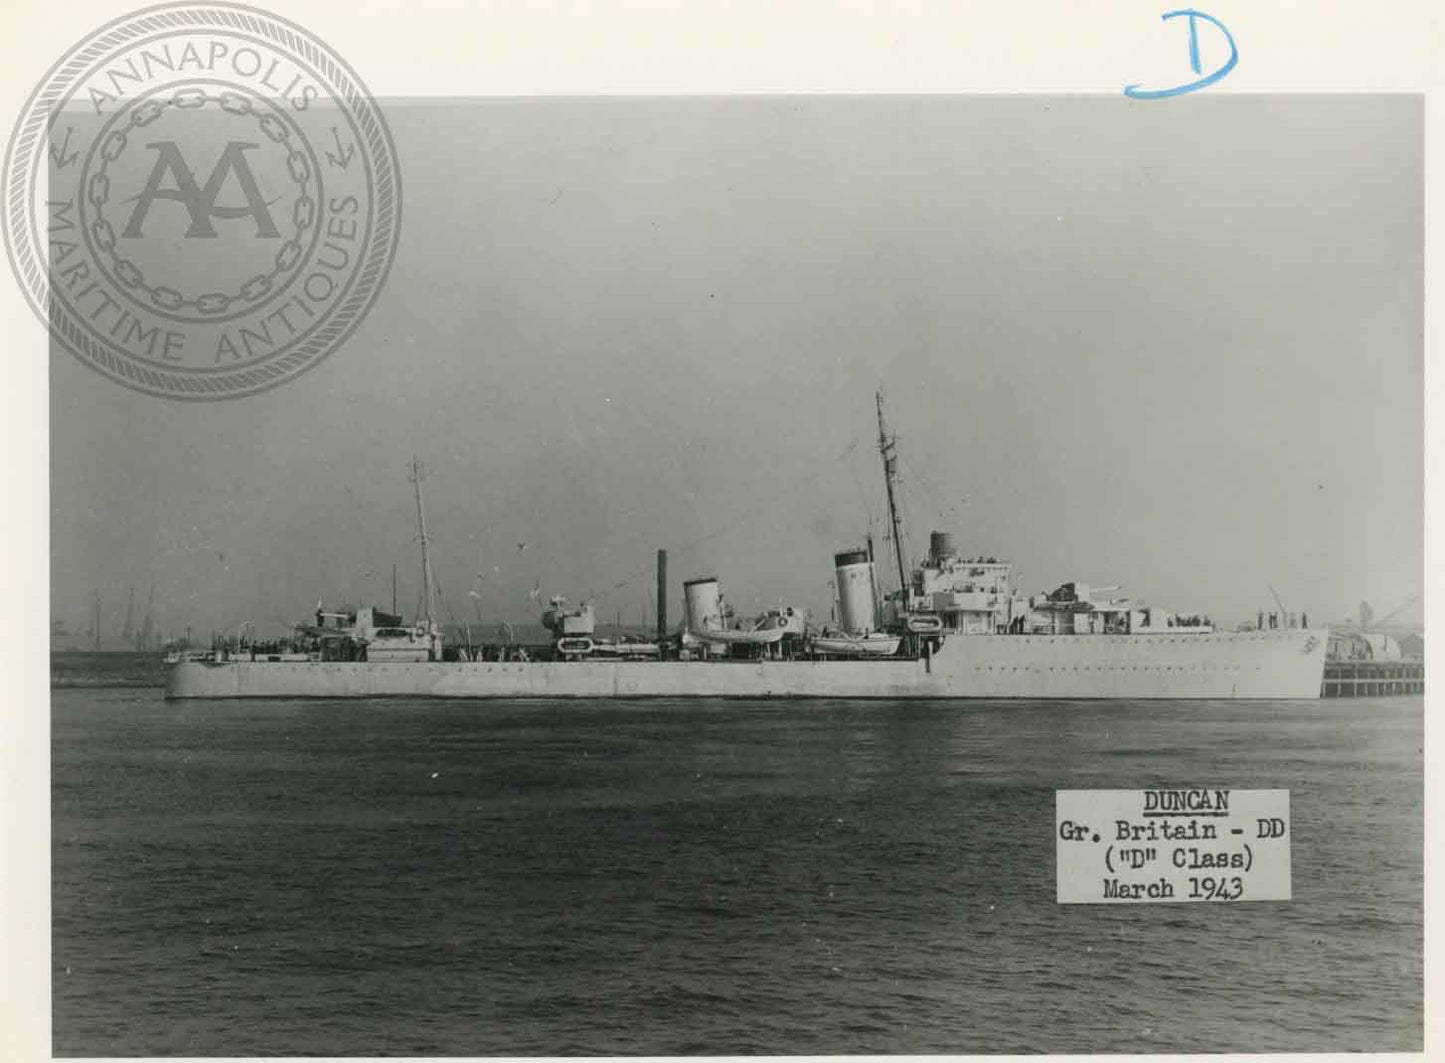 British and Canadian "E" Class Destroyers